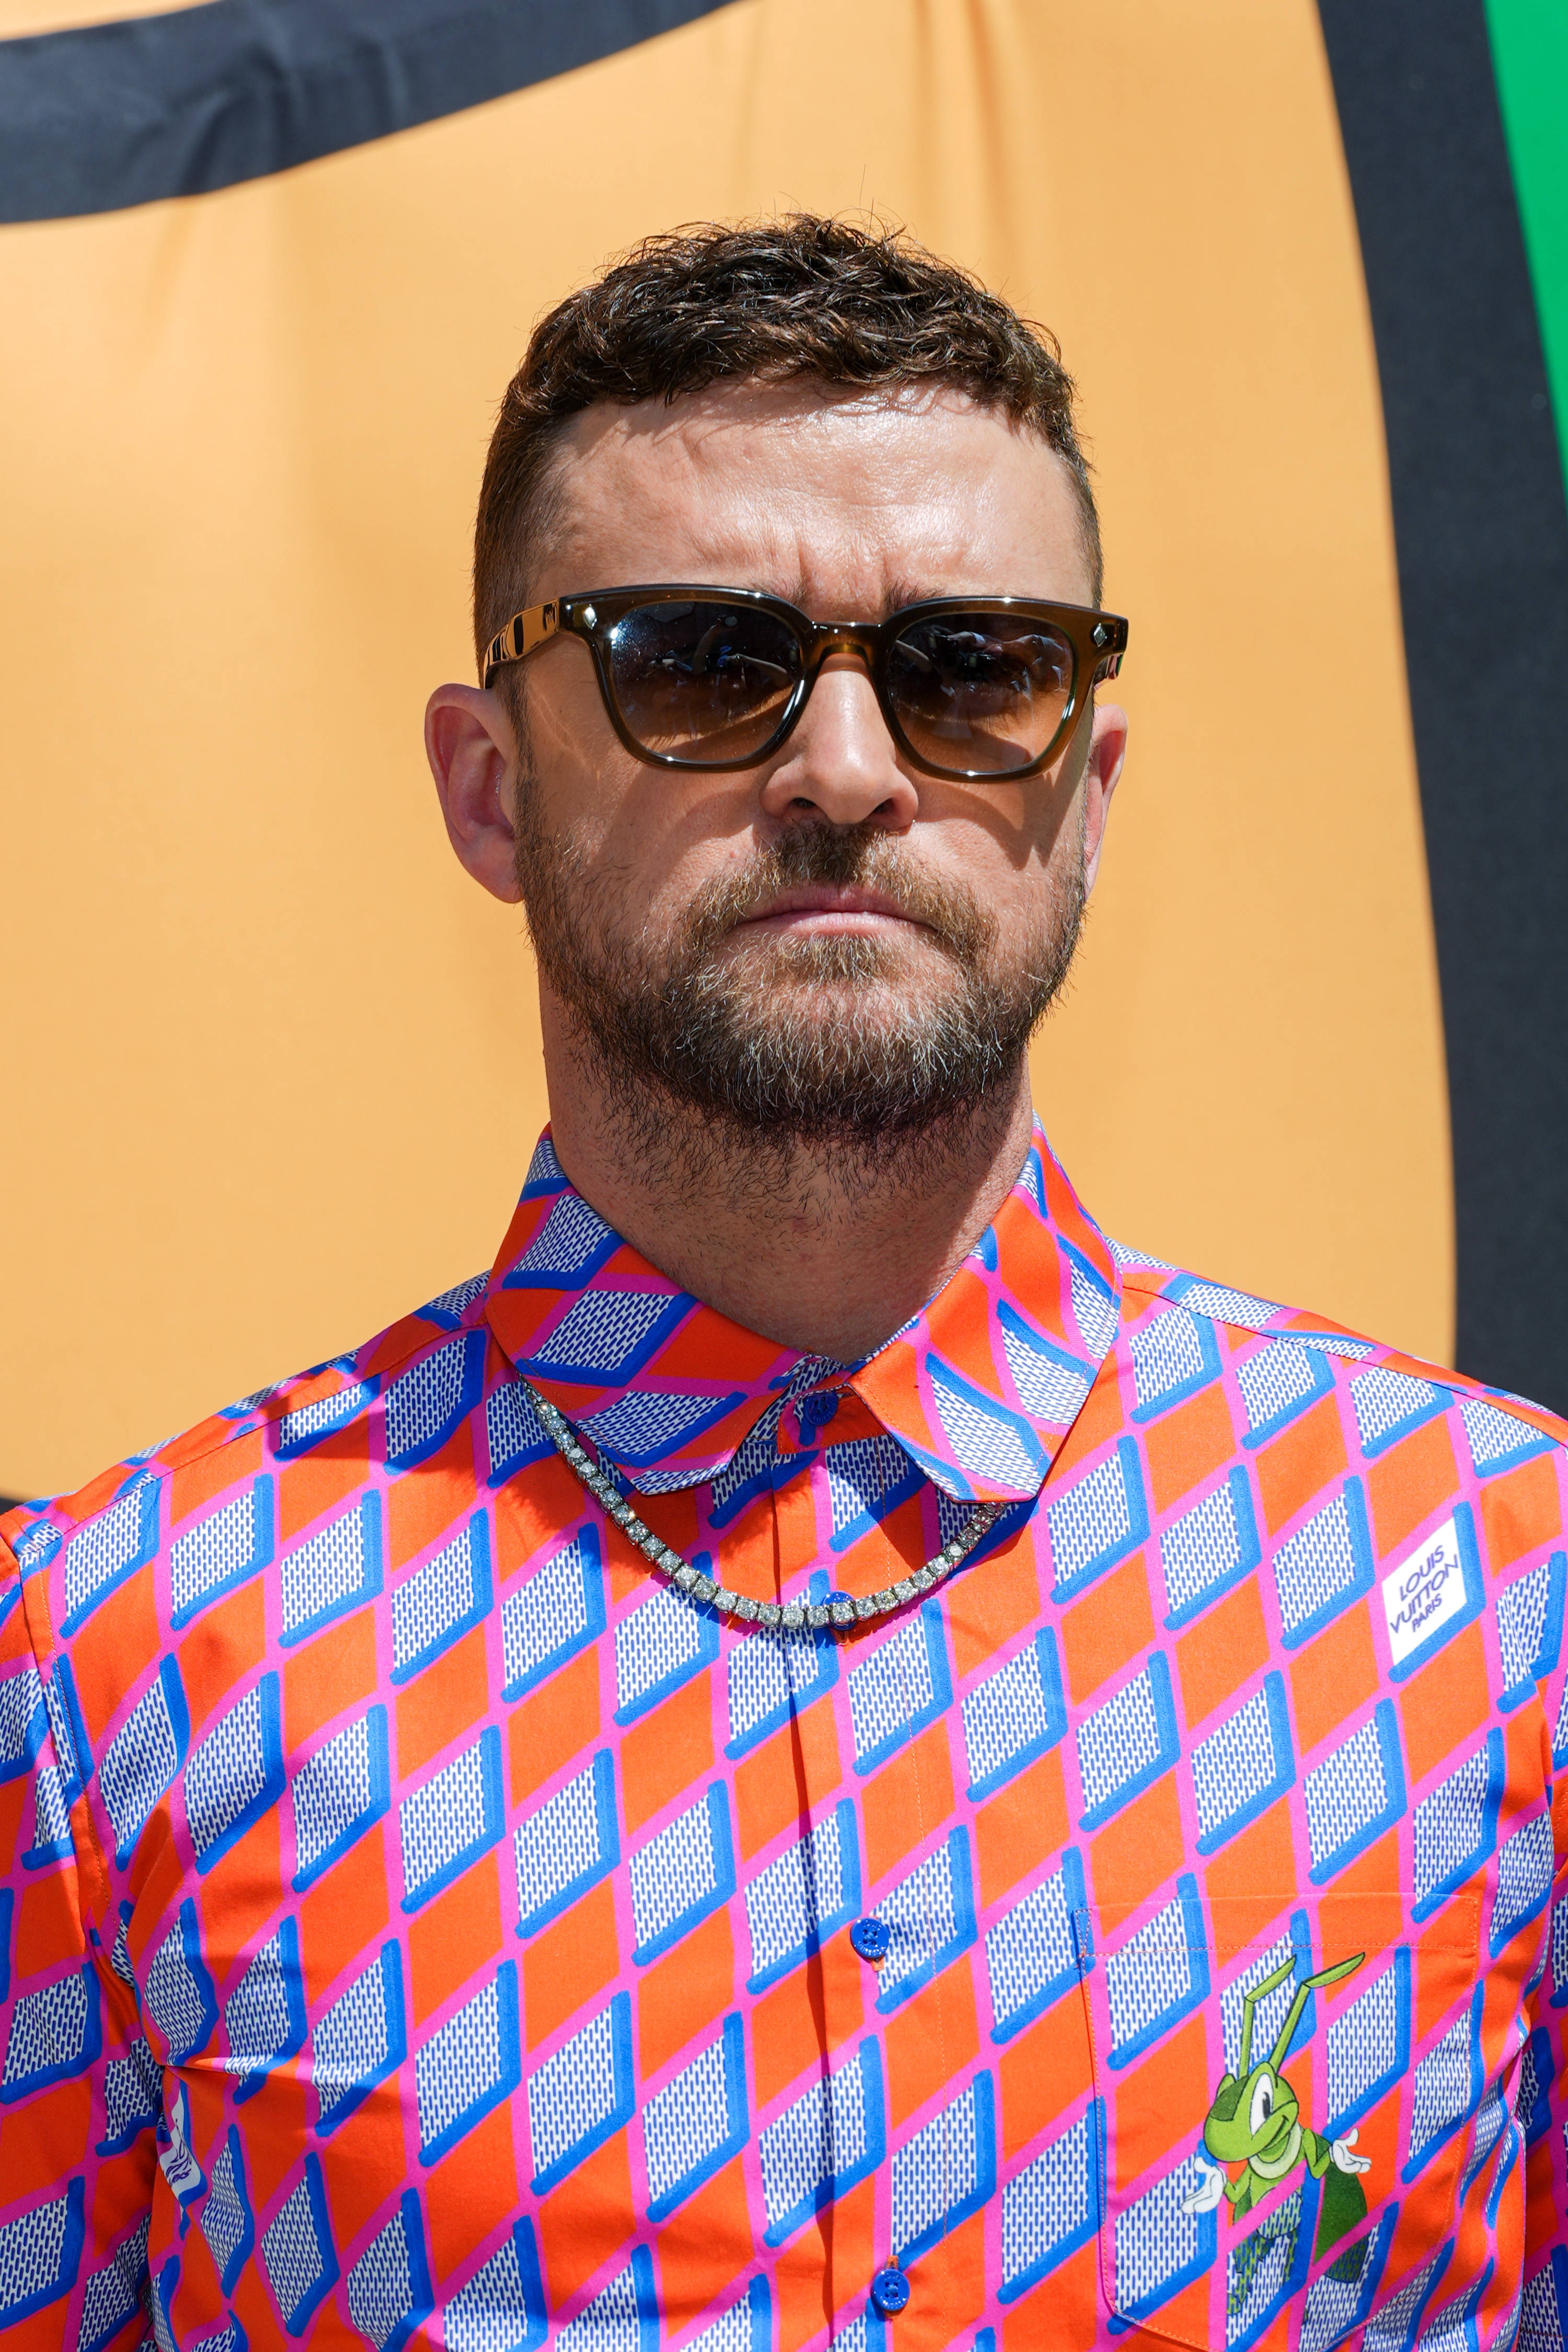 Fans Think Justin Timberlake Had 'Bad Plastic Surgery' After His Latest  Public Appearance